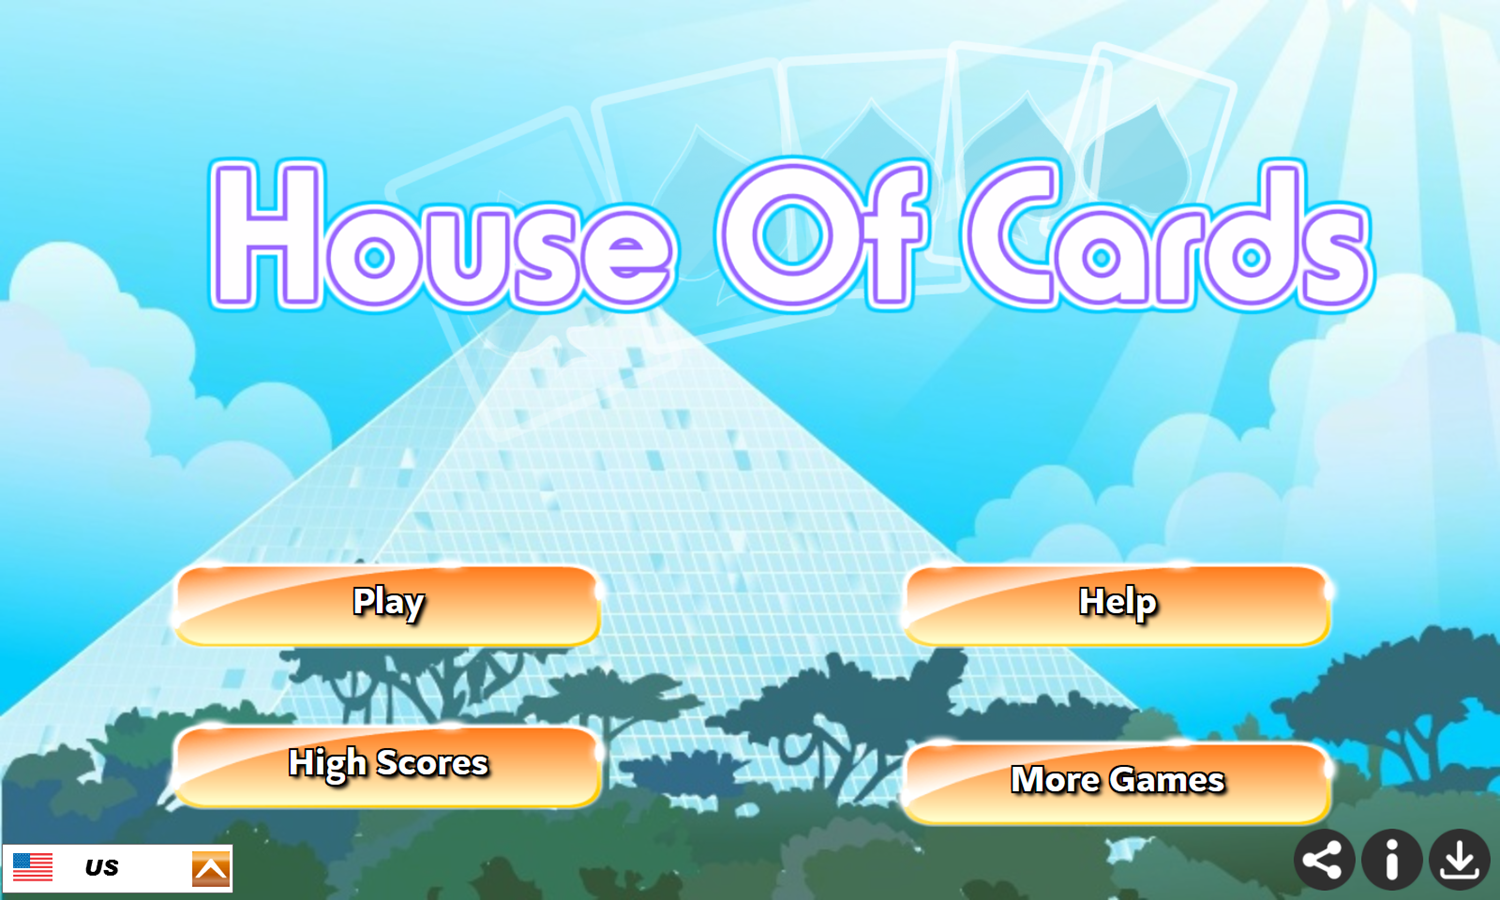 House of Cards Game Welcome Screen Screenshot.